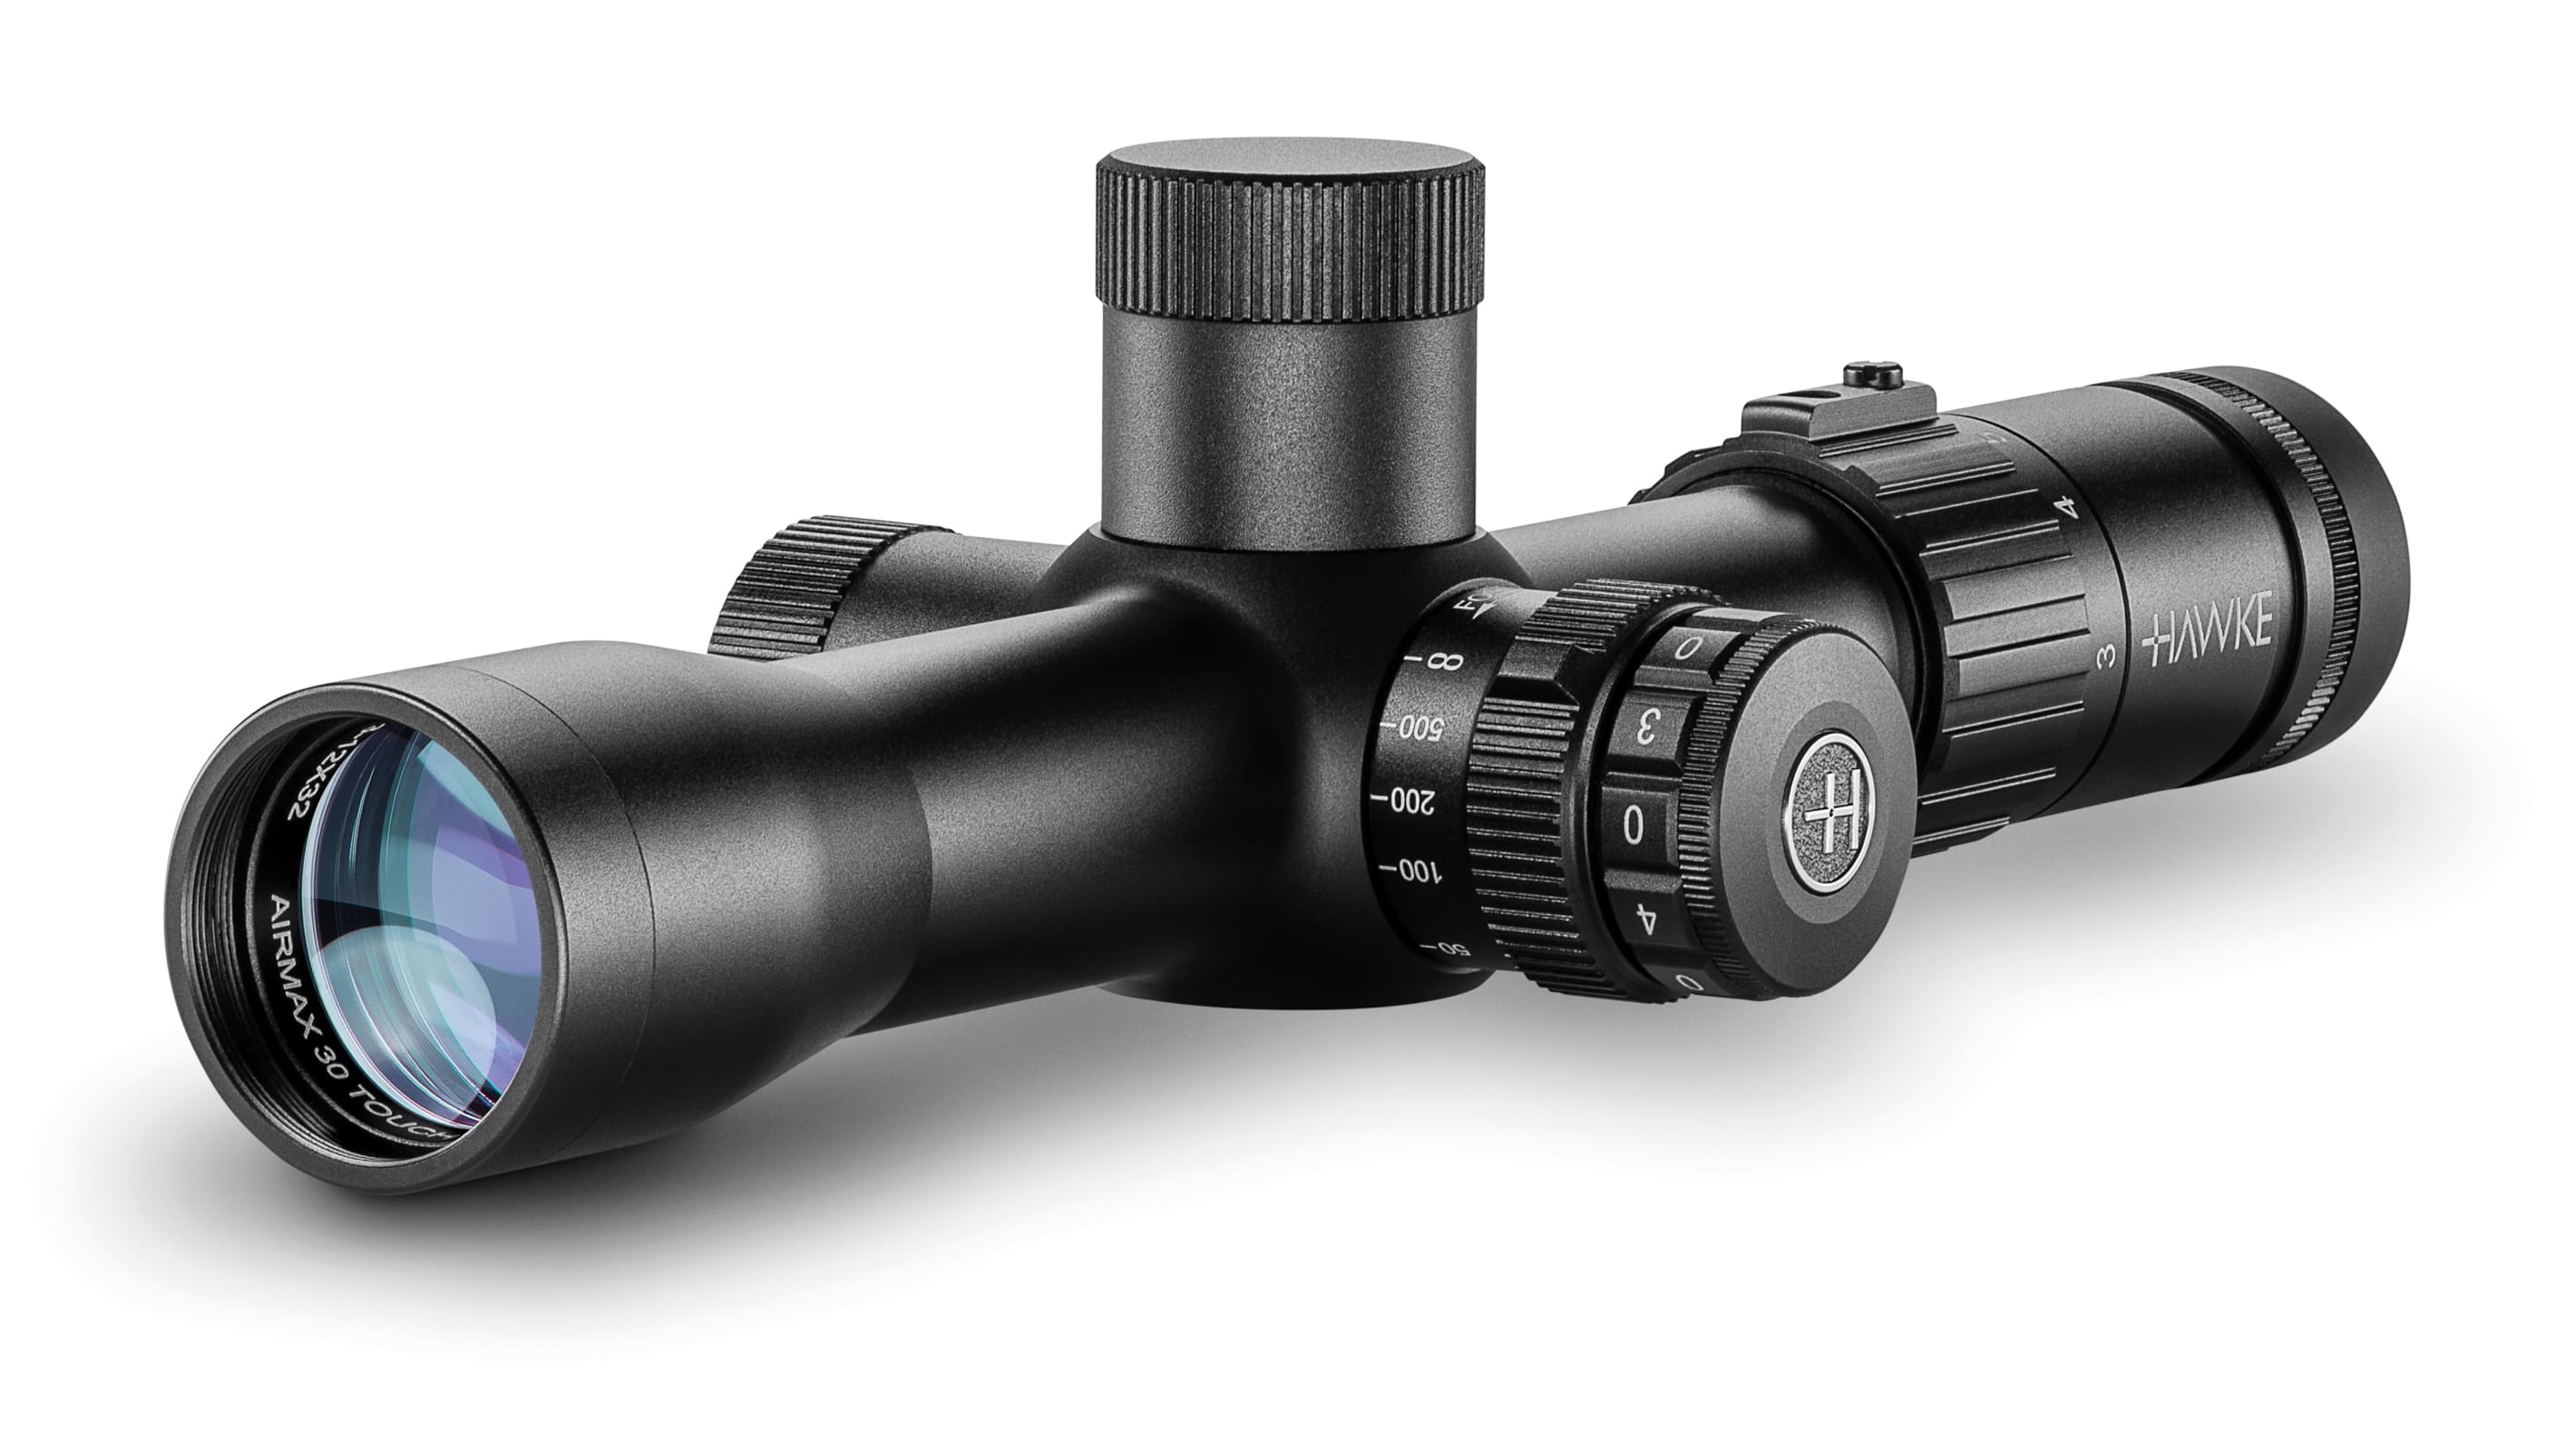 Objective End View Of The Hawke Airmax 30 Touch 3-12x32 AMX IR Air Rifle Scope